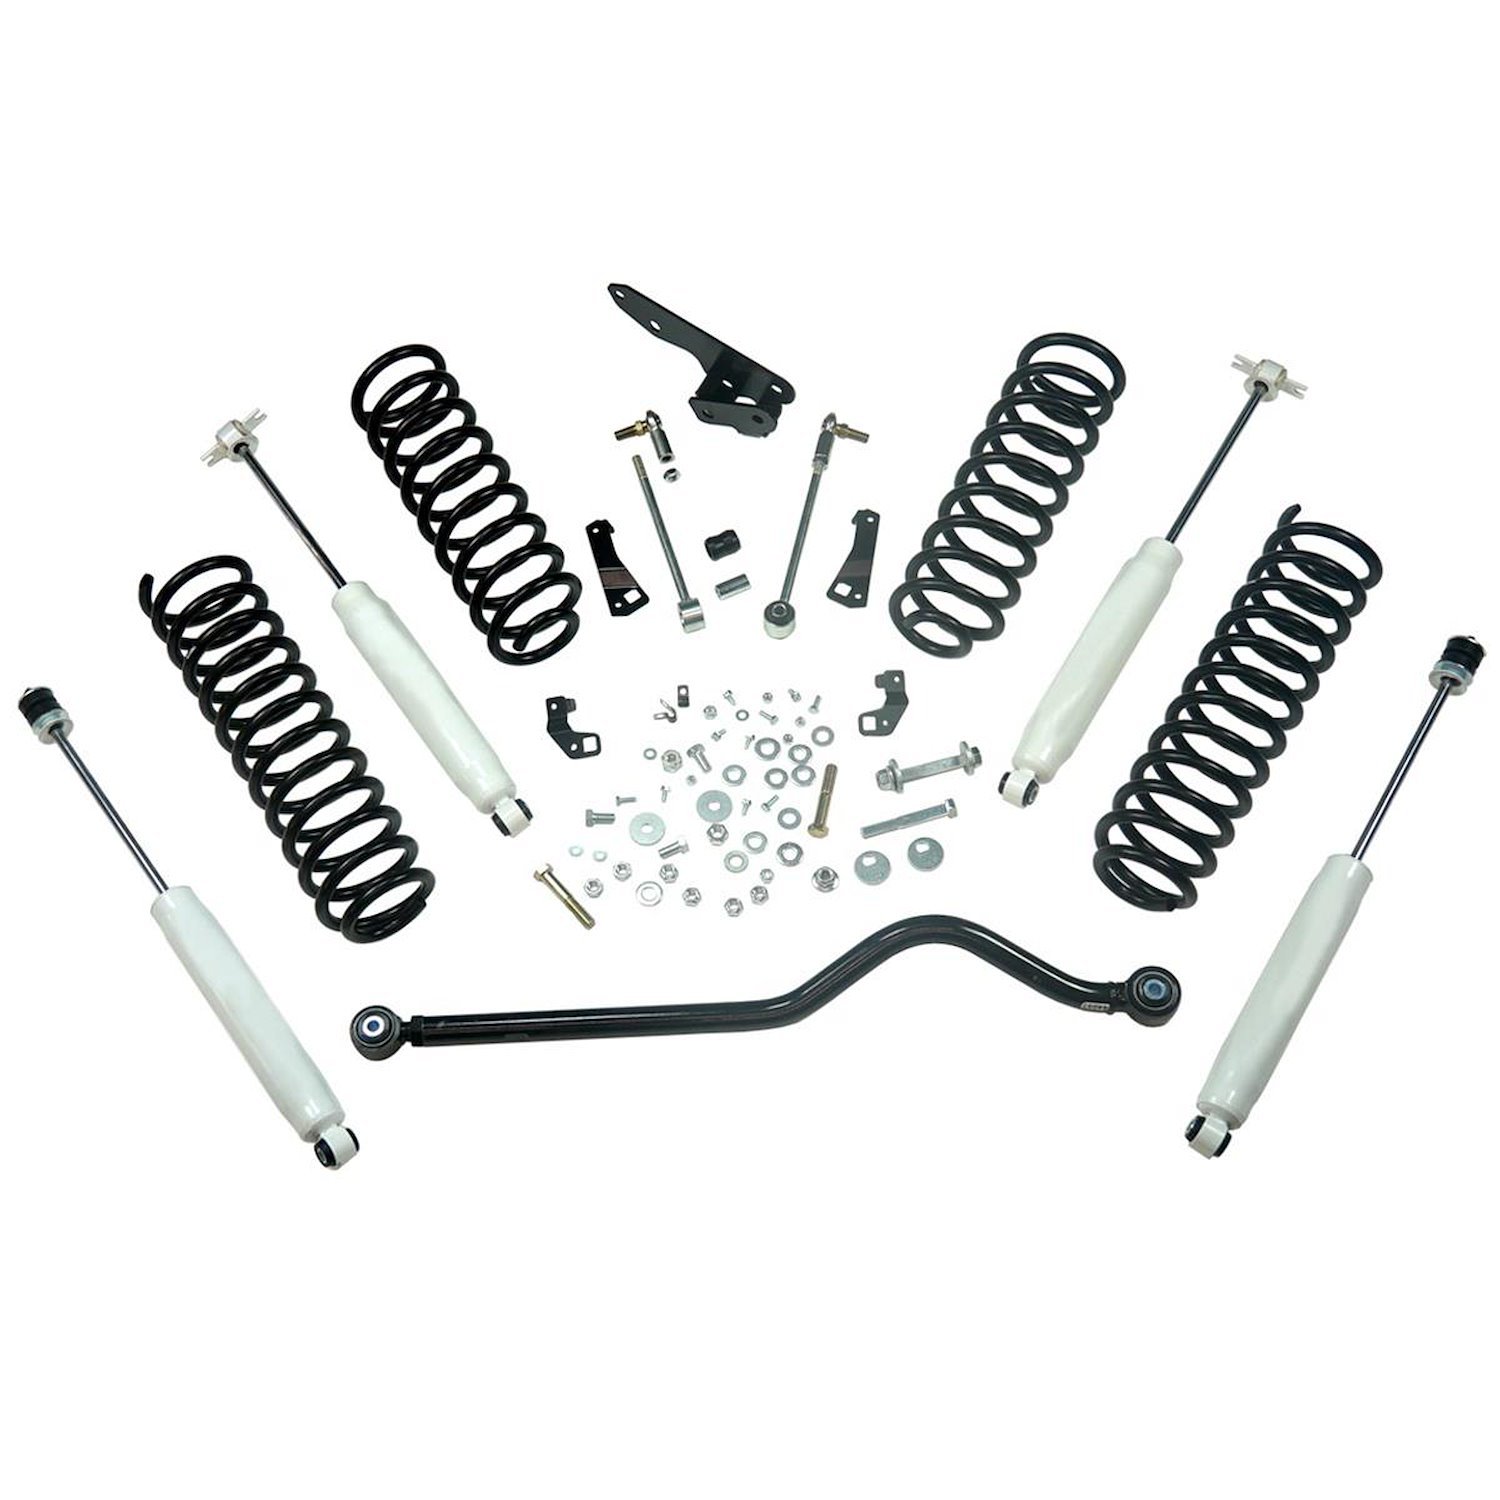 61403 Front and Rear Suspension Lift Kit, Lift Amount: 4 in. Front/4 in. Rear